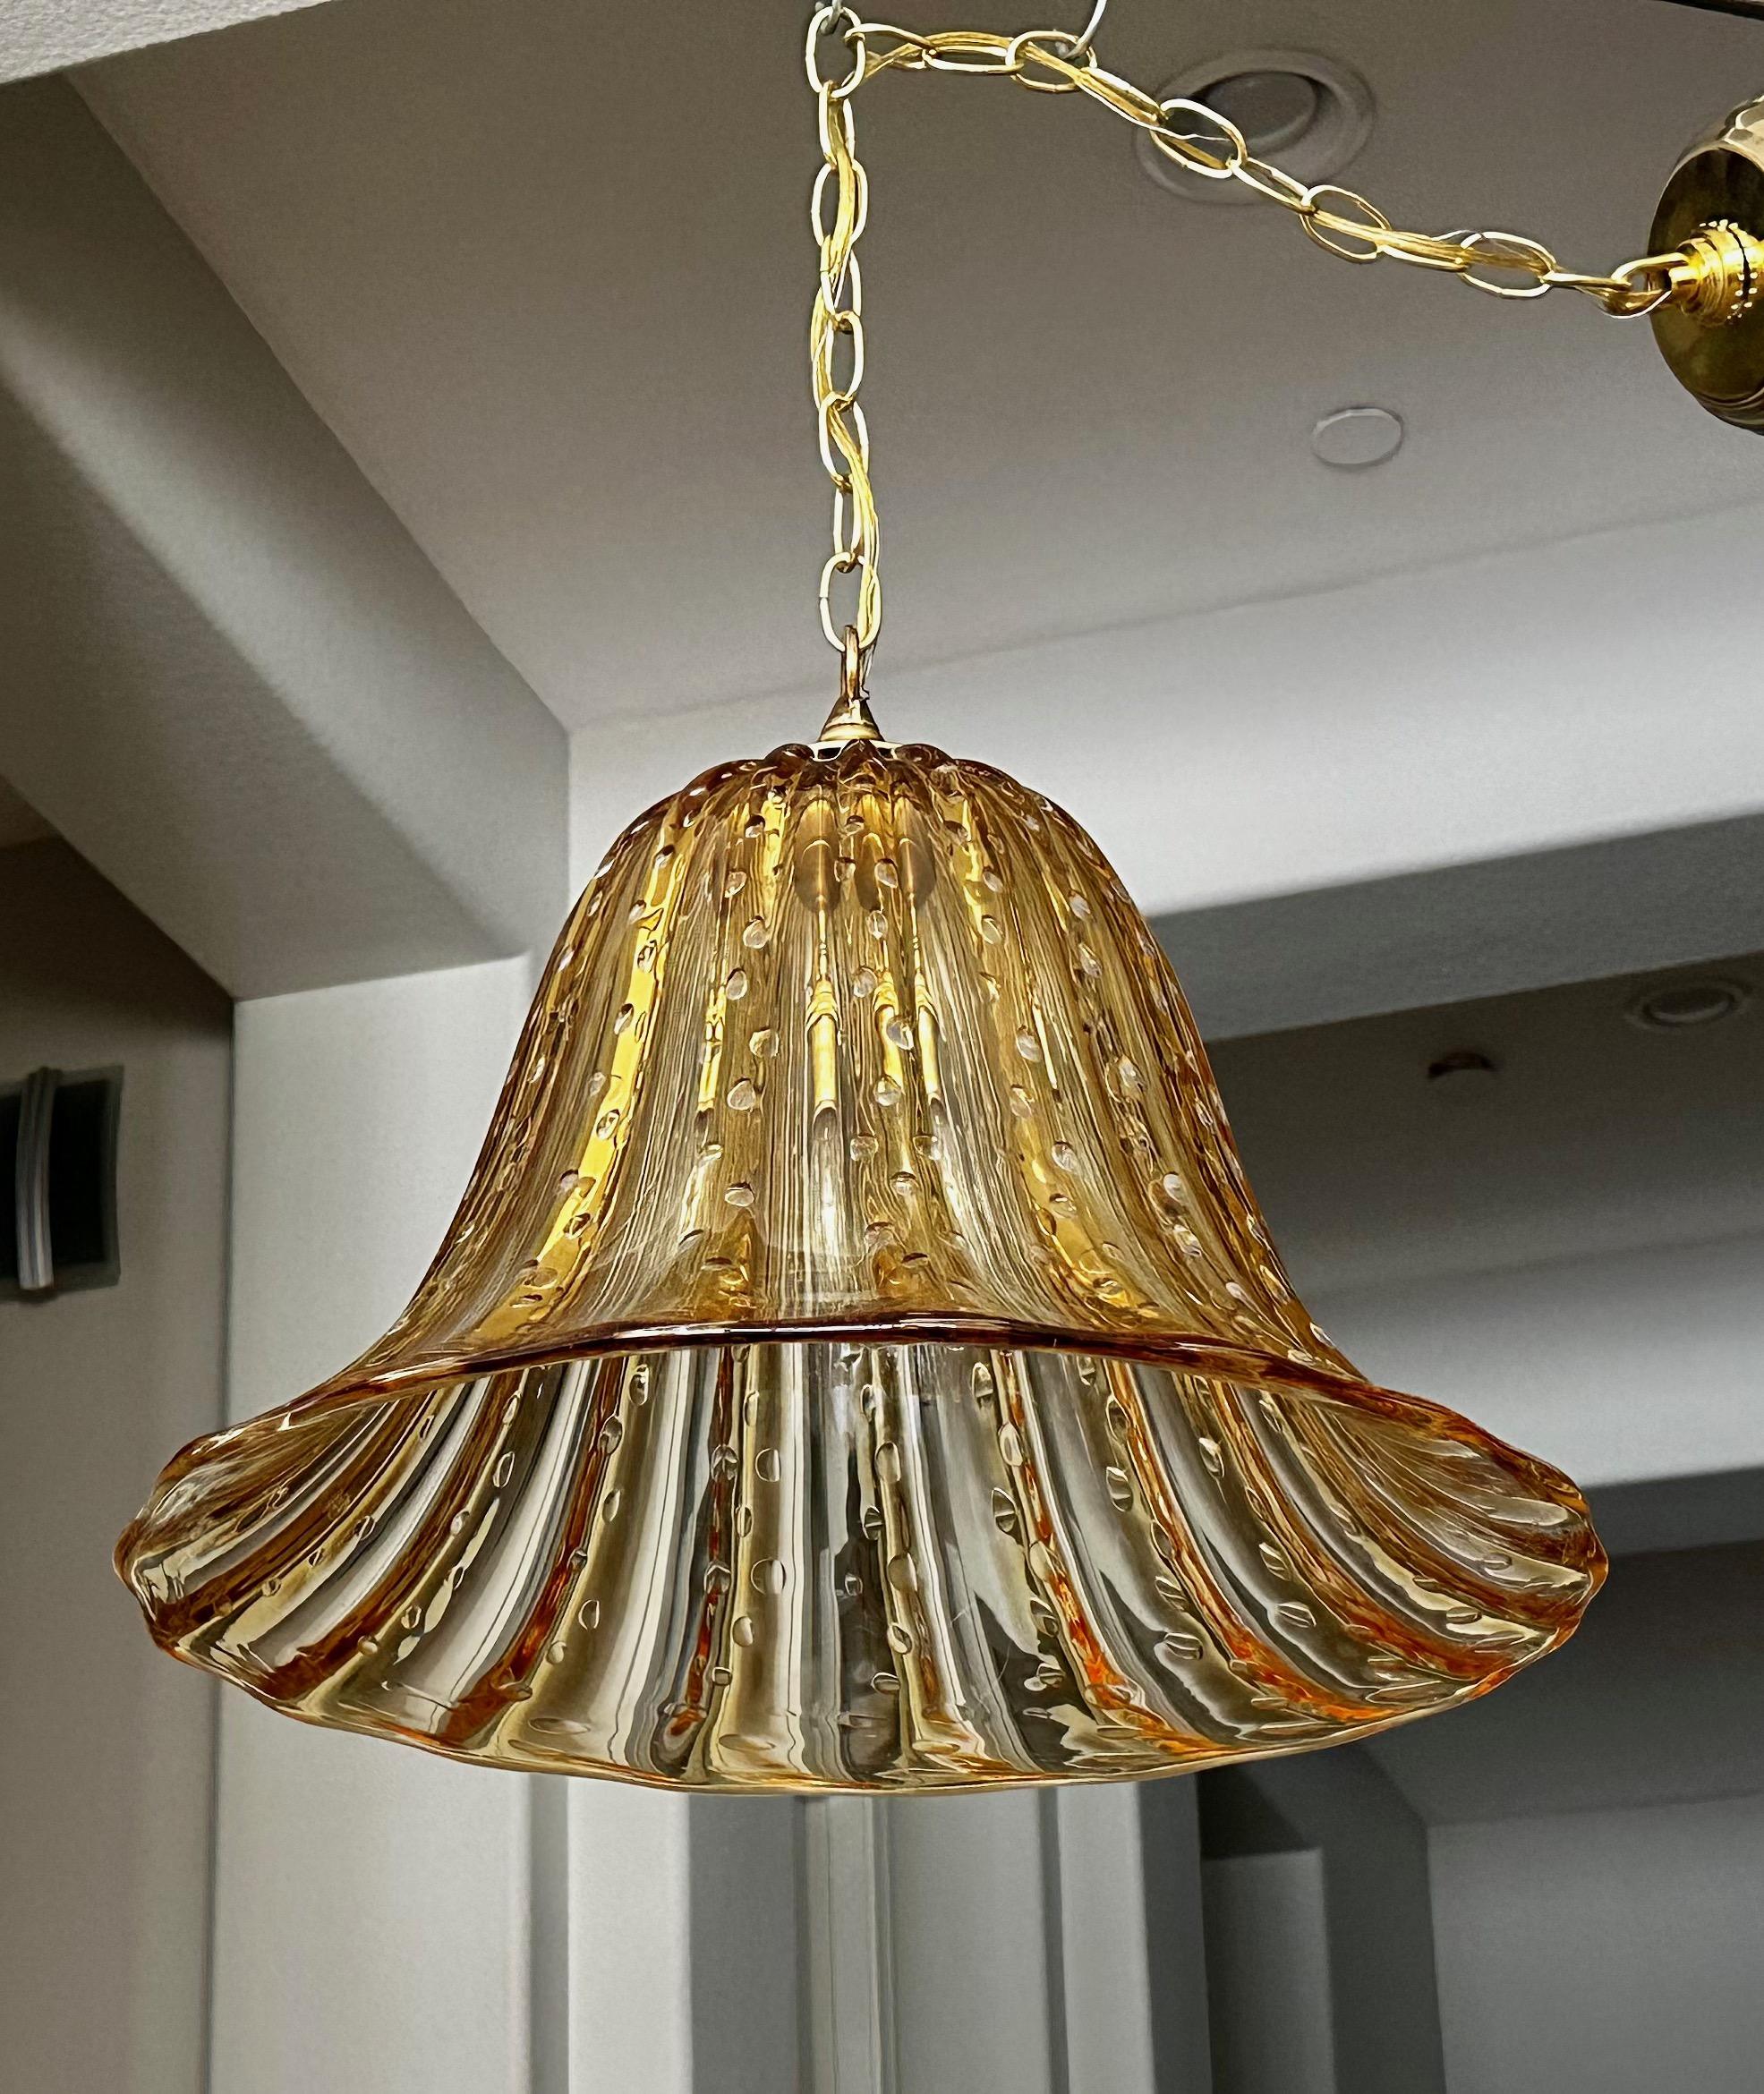 Murano Italian bell shape gold amber colored hand blown glass pendant ceiling light. The glass has vertical ribbing along with rows of controlled bubbles. Attributed to Barovier & Toso. Fixture uses regular A base bulb. Newly wired. Perfect for